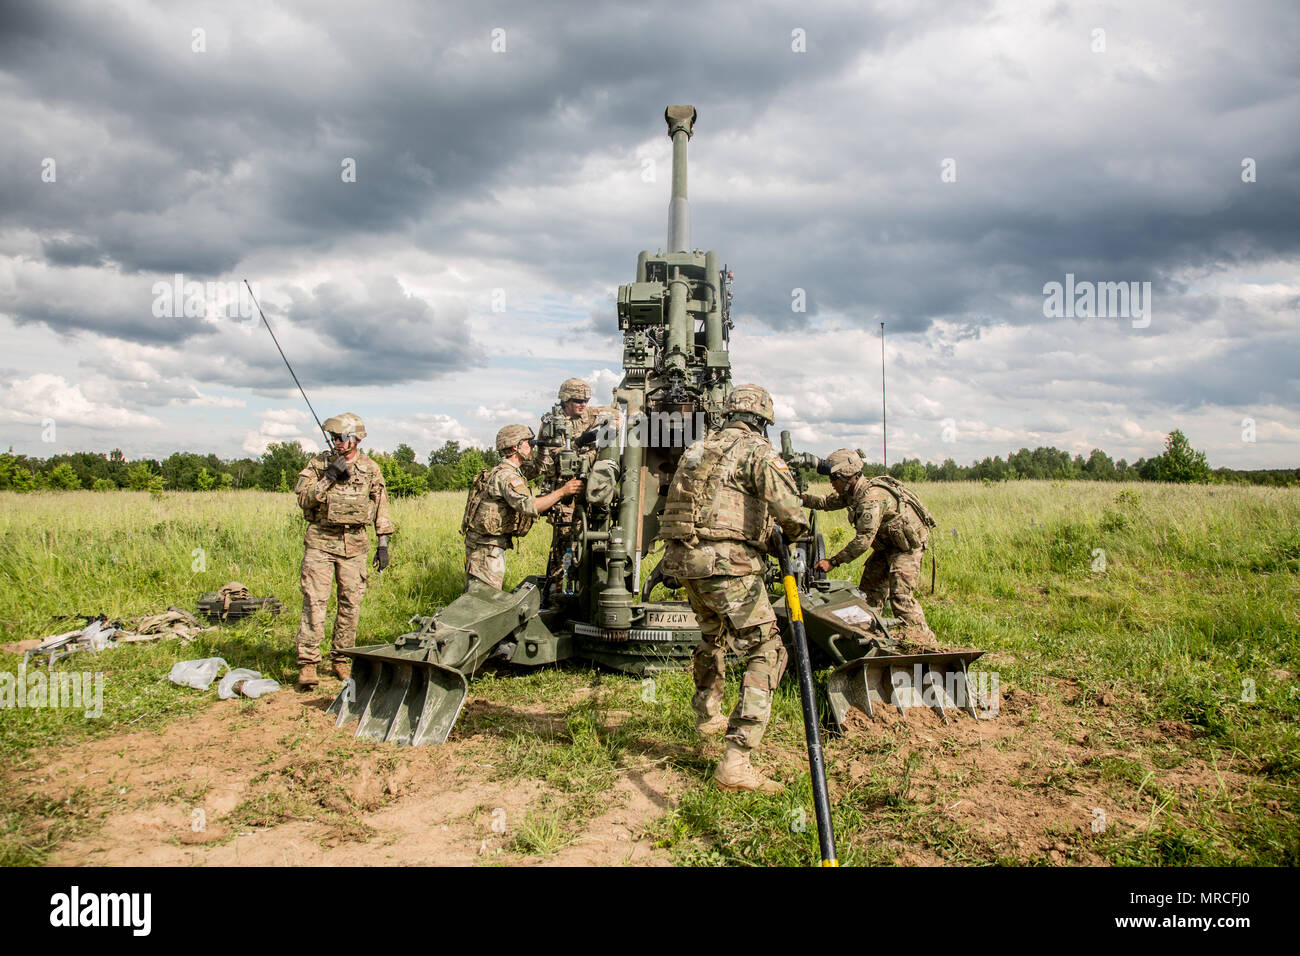 Battle Group Poland U.S. Solders, assigned to Bulldog Battery, 2nd Squadron, 2nd Cavalry Regiment, along with 10th Mountain Combat Aviation Brigade, conduct sling load and air assault training with M777A2 Howitzers, during Saber Strike 2017, at Bemowo Piskie Training Area near Orzysz, Poland, June 7, 2017. Saber Strike17 is a U.S. Army Europe-led multinational combined forces exercise conducted annually to enhance the NATO alliance throughout the Baltic region and Poland. This year's exercise includes integrated and synchronized deterrence- oriented training designed to improve interoperabilit Stock Photo